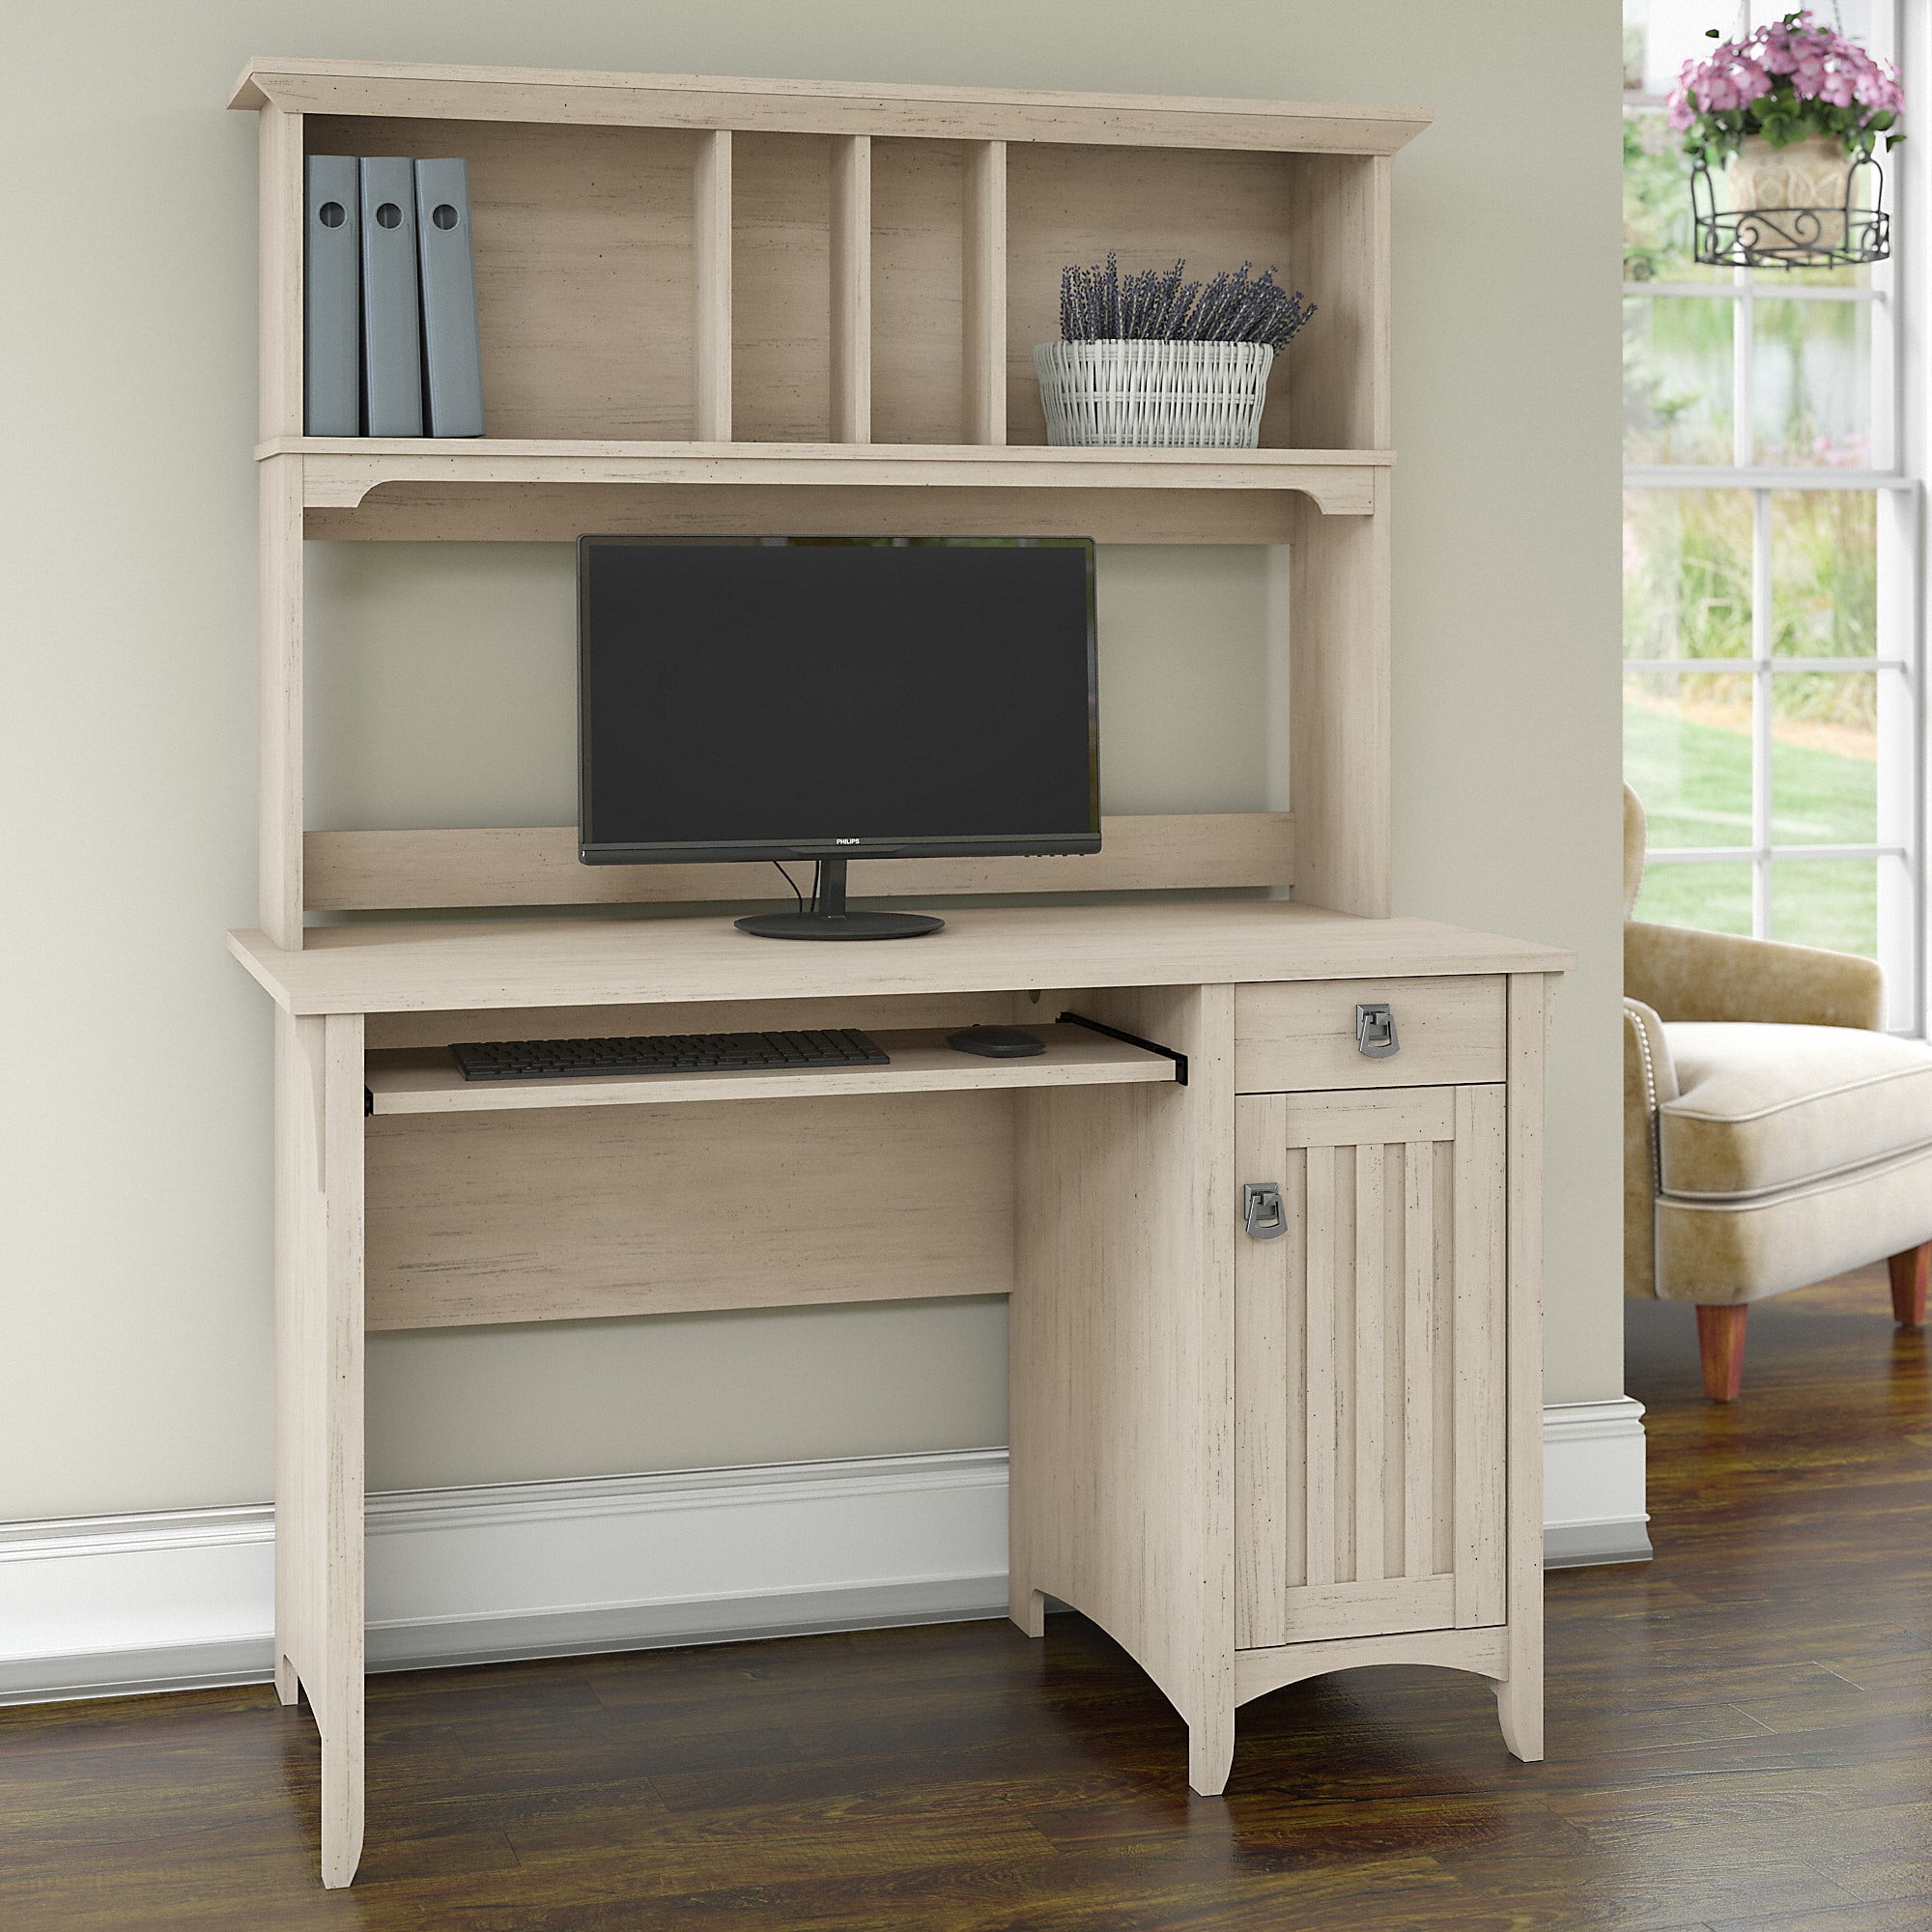 White Computer Desk with Shelves and Storage Bin 